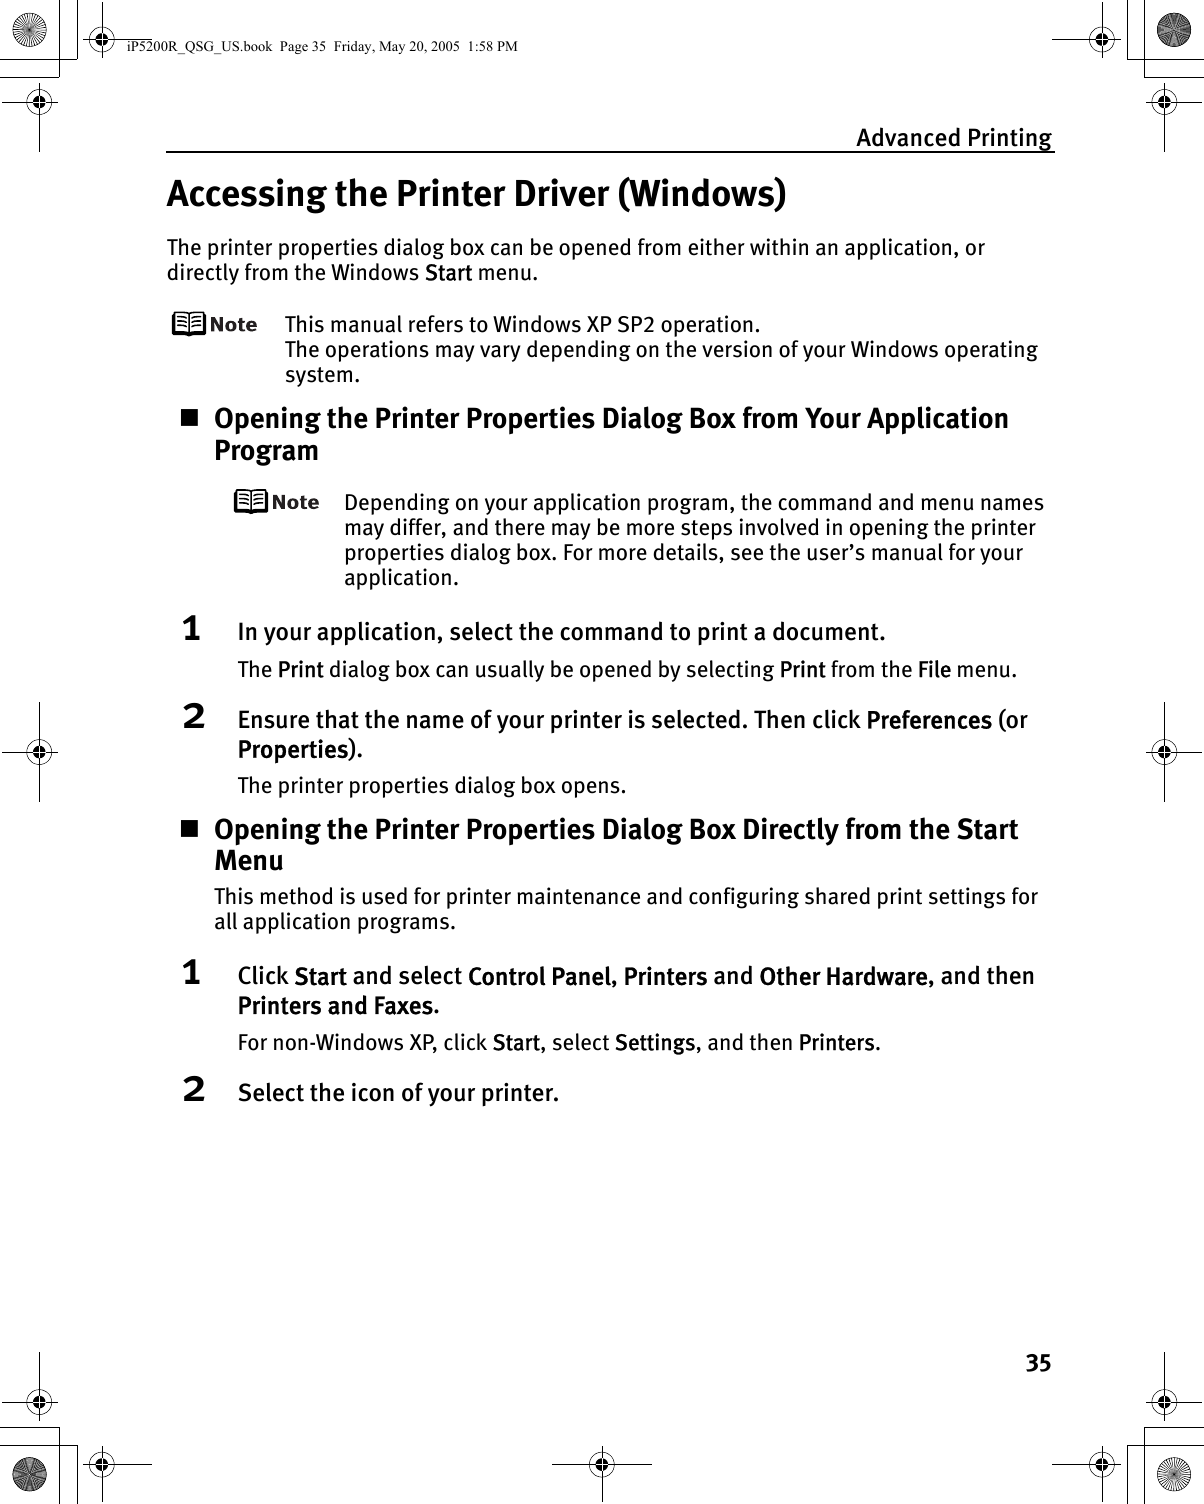 Advanced Printing35Accessing the Printer Driver (Windows)The printer properties dialog box can be opened from either within an application, or directly from the Windows Start menu.This manual refers to Windows XP SP2 operation.The operations may vary depending on the version of your Windows operating system.Opening the Printer Properties Dialog Box from Your Application ProgramDepending on your application program, the command and menu names may differ, and there may be more steps involved in opening the printer properties dialog box. For more details, see the user’s manual for your application.1In your application, select the command to print a document.The Print dialog box can usually be opened by selecting Print from the File menu.2Ensure that the name of your printer is selected. Then click Preferences (or Properties).The printer properties dialog box opens.Opening the Printer Properties Dialog Box Directly from the Start MenuThis method is used for printer maintenance and configuring shared print settings for all application programs.1Click Start and select Control Panel, Printers and Other Hardware, and then Printers and Faxes.For non-Windows XP, click Start, select Settings, and then Printers.2Select the icon of your printer.iP5200R_QSG_US.book  Page 35  Friday, May 20, 2005  1:58 PM